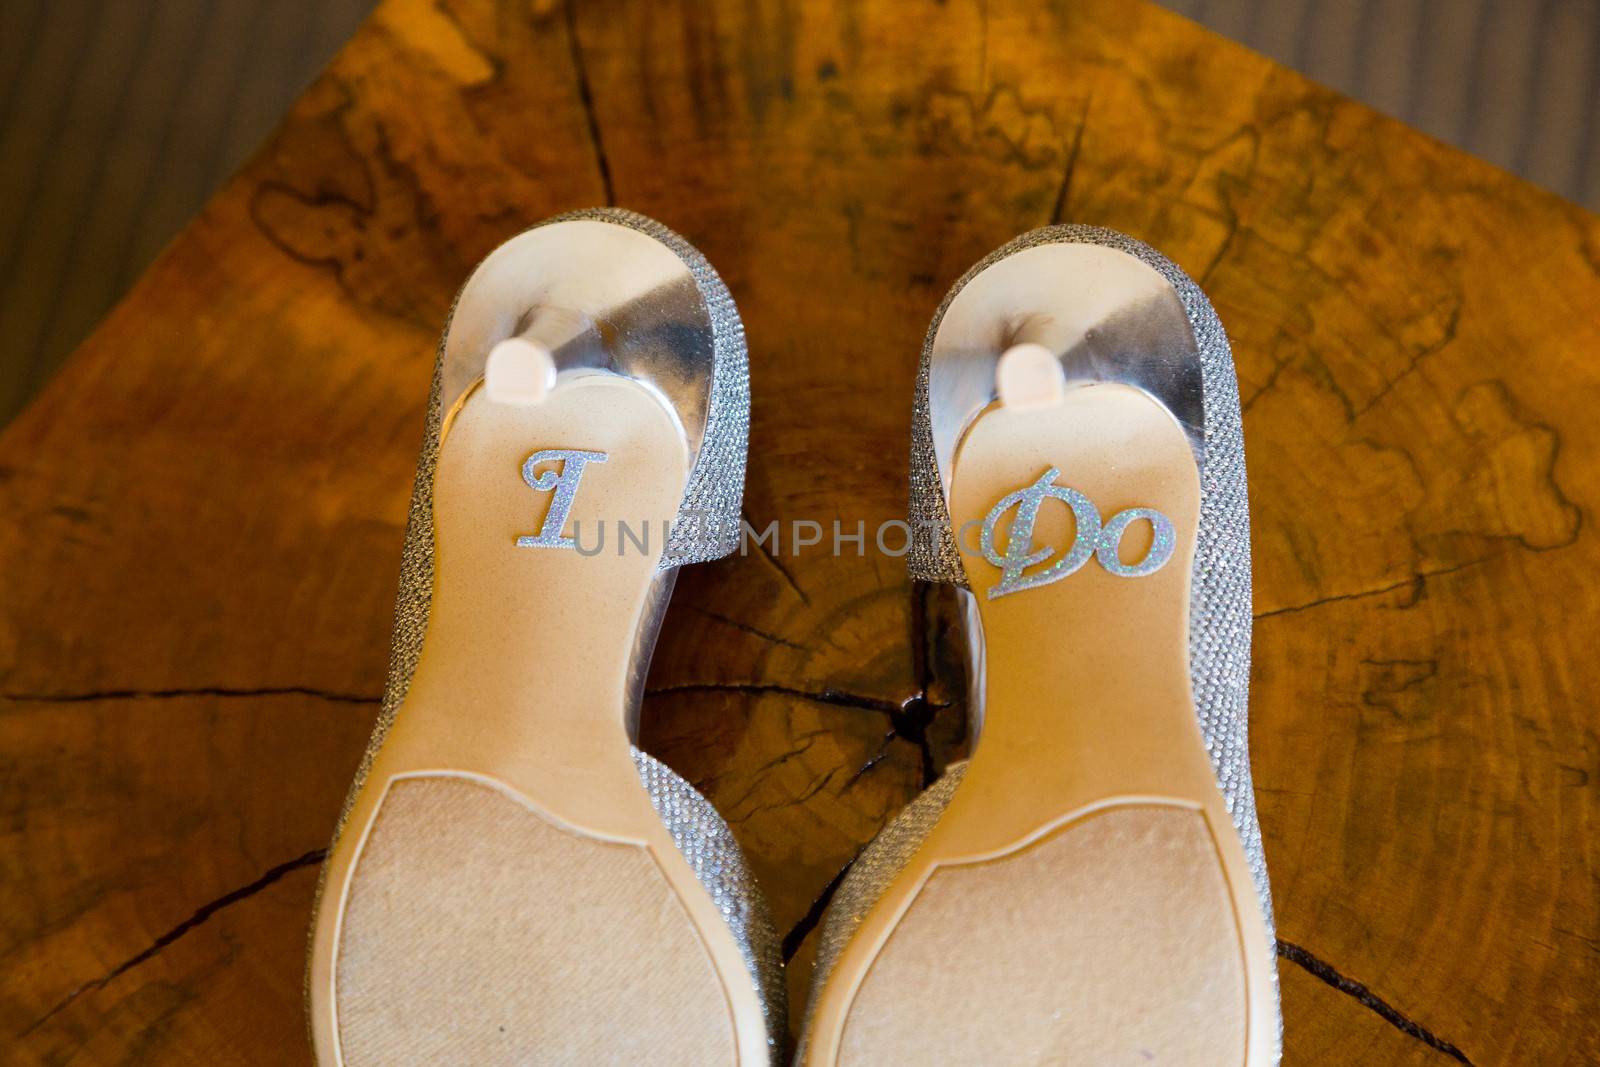 These wedding shoes say I Do on the bottom of the heels.